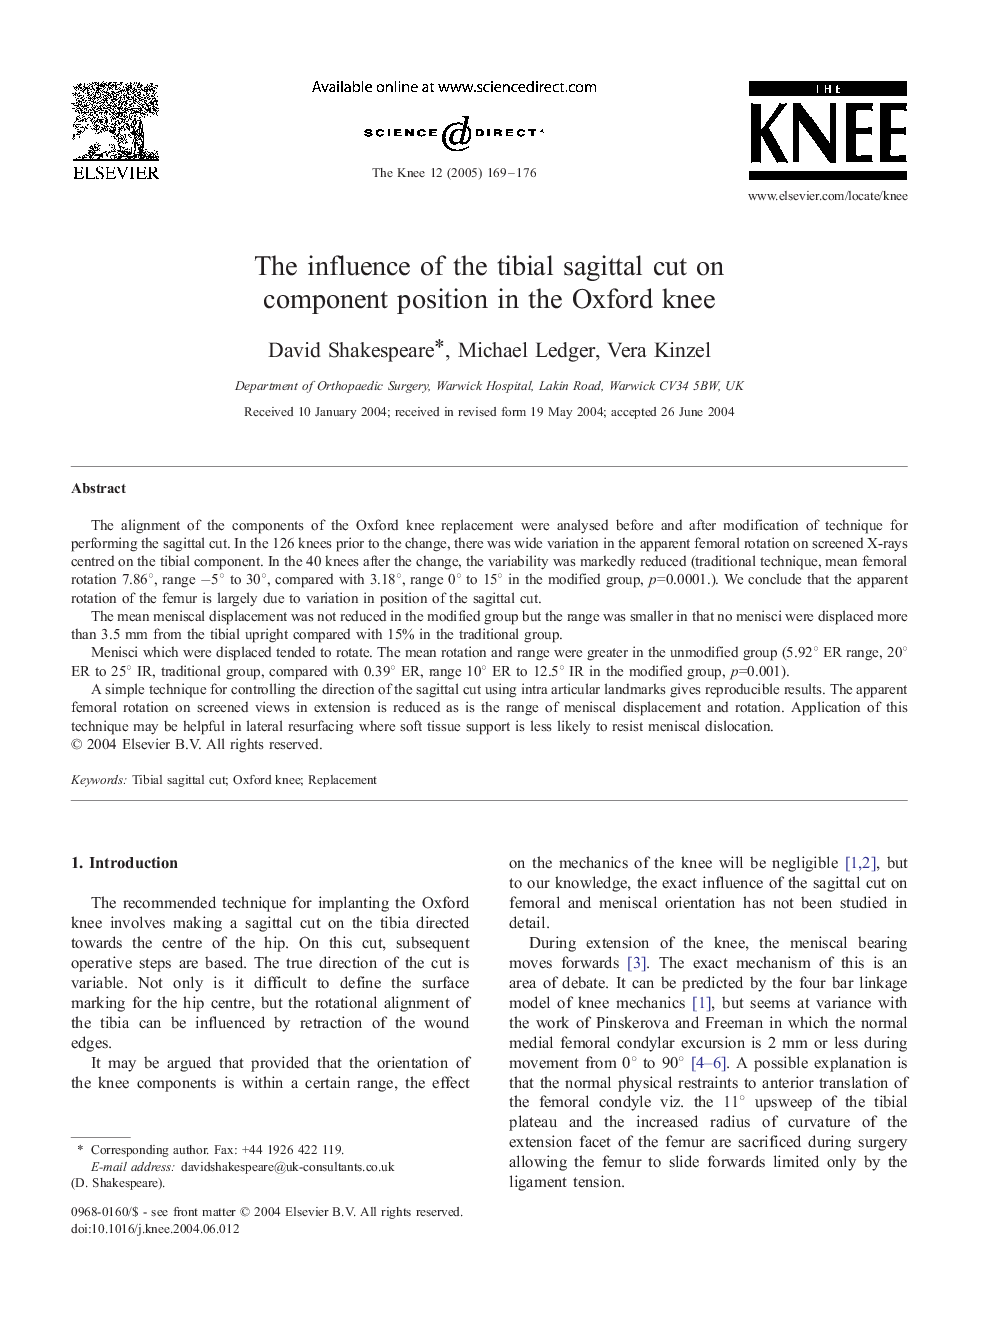 The influence of the tibial sagittal cut on component position in the Oxford knee